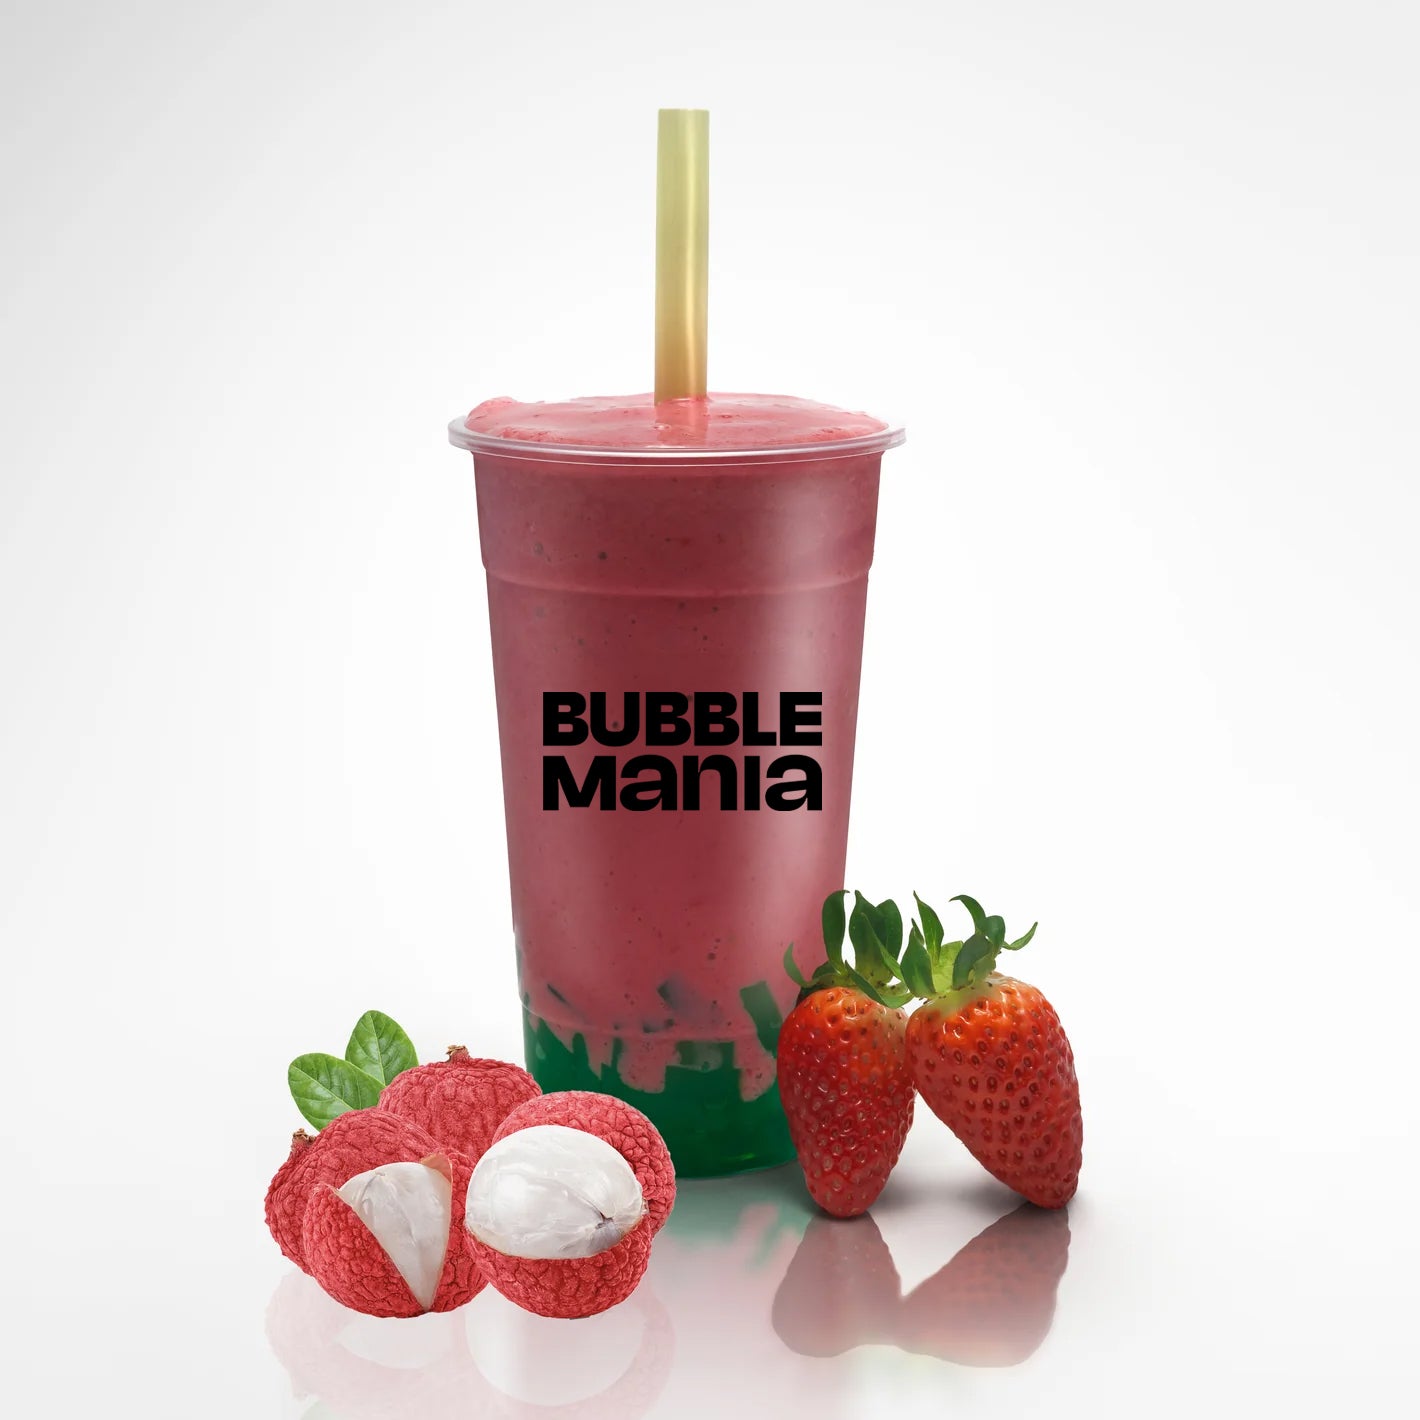 Lychee-Strawberry Smoothie - Blend up BubbleMania's original recipe for a delicious lychee-strawberry smoothie at home.